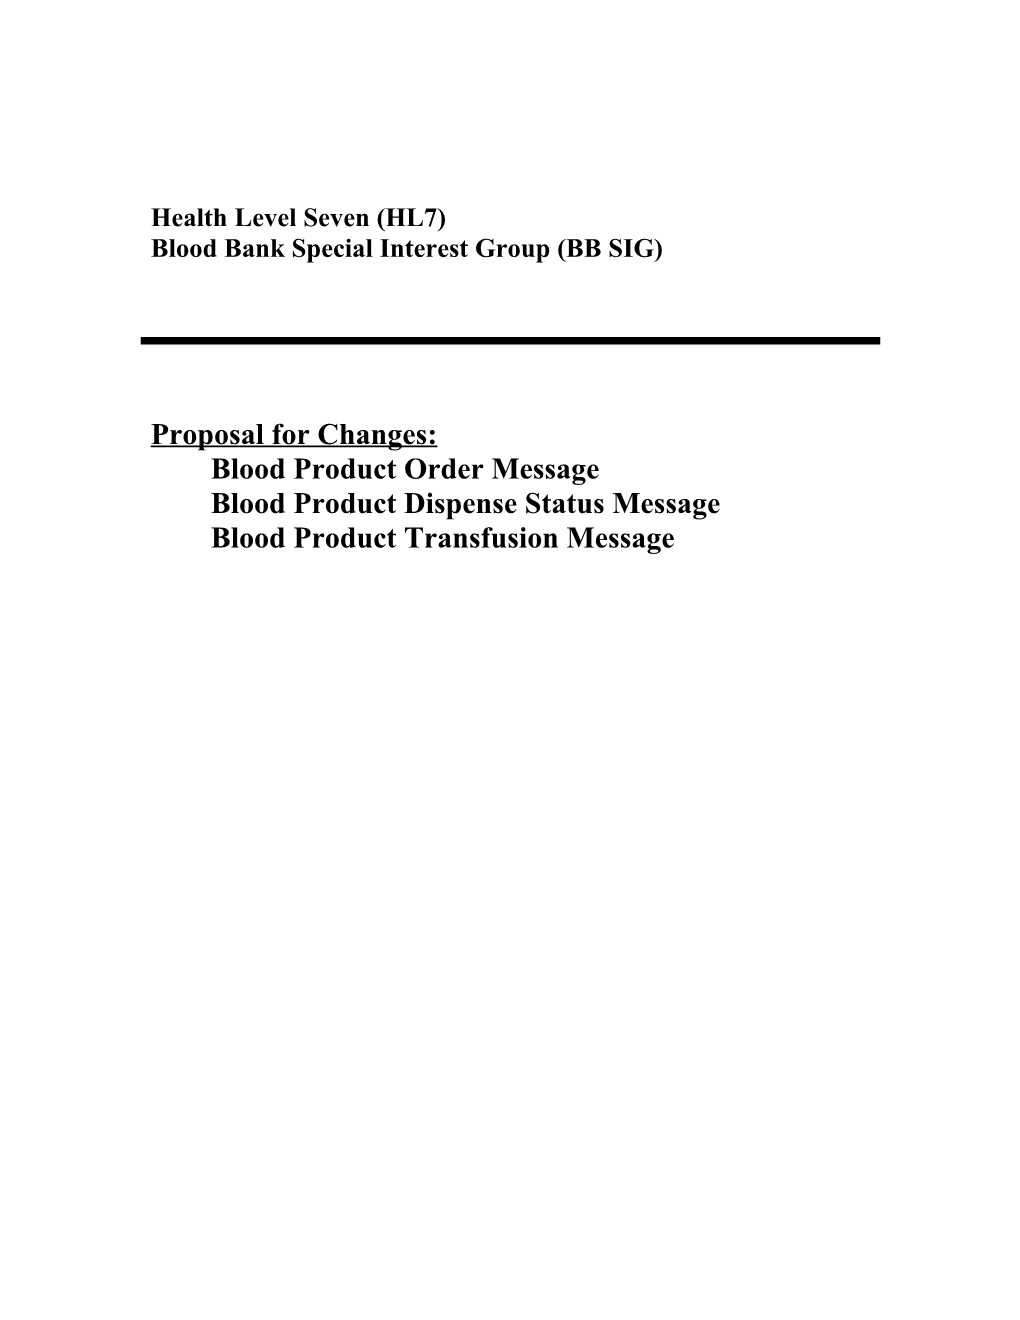 Blood Bank Special Interest Group (BB SIG)